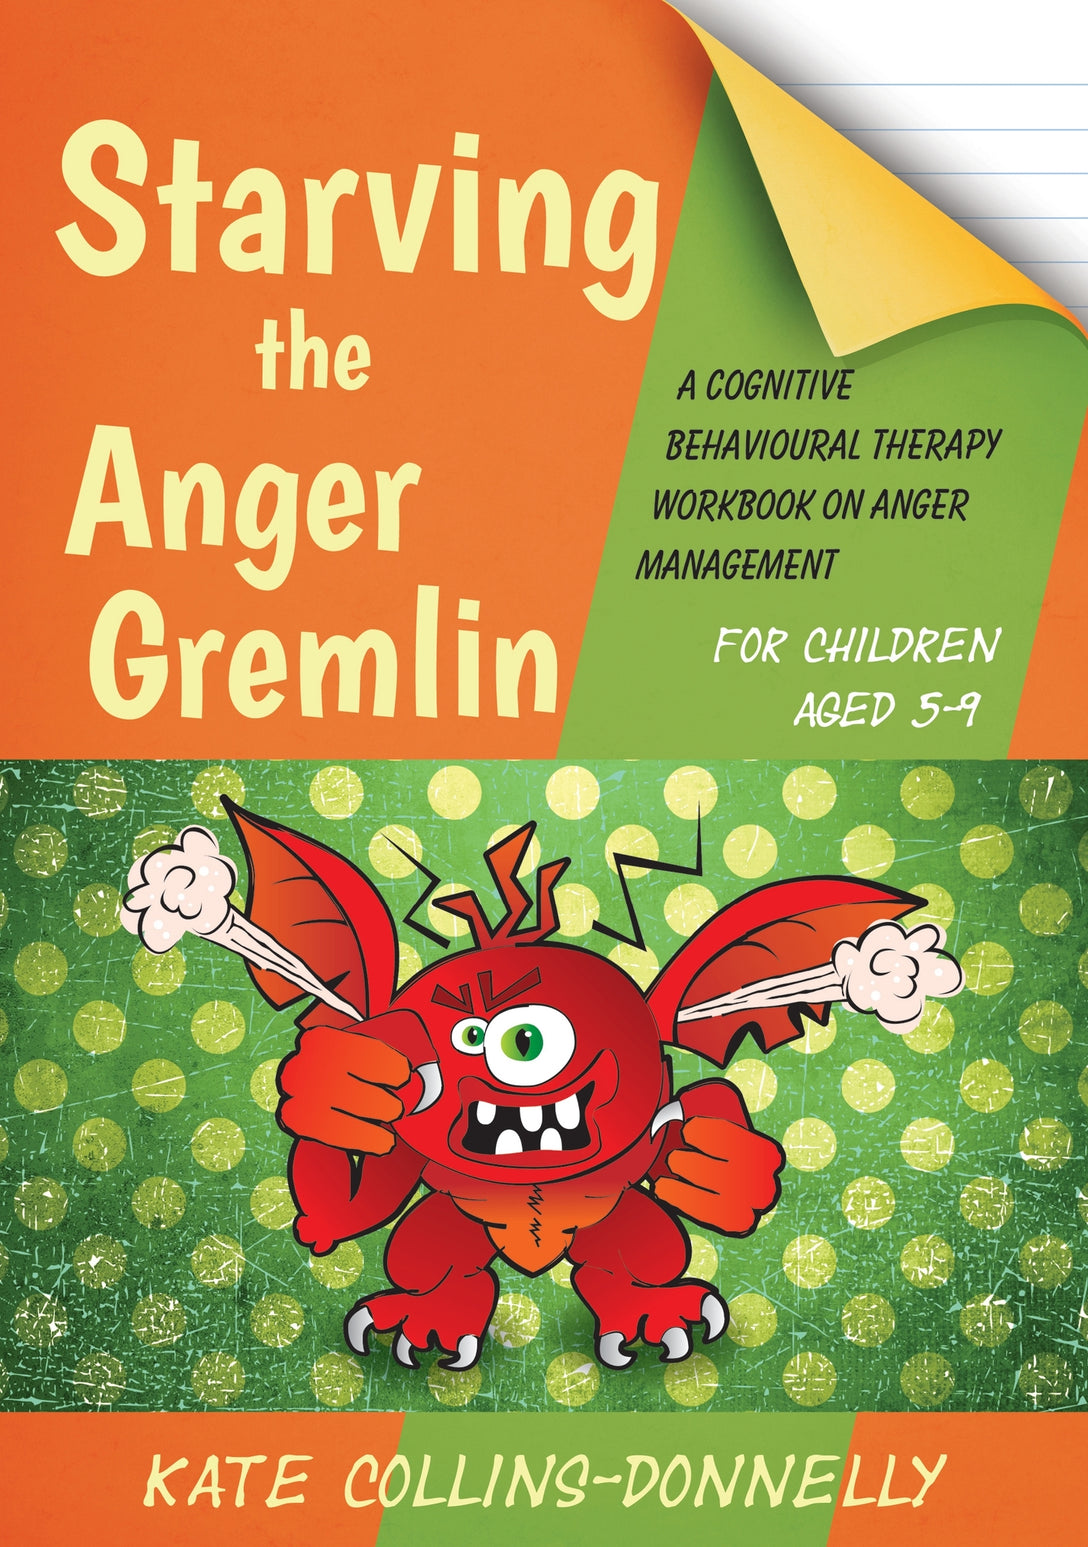 Starving the Anger Gremlin for Children Aged 5-9 by Kate Collins-Donnelly